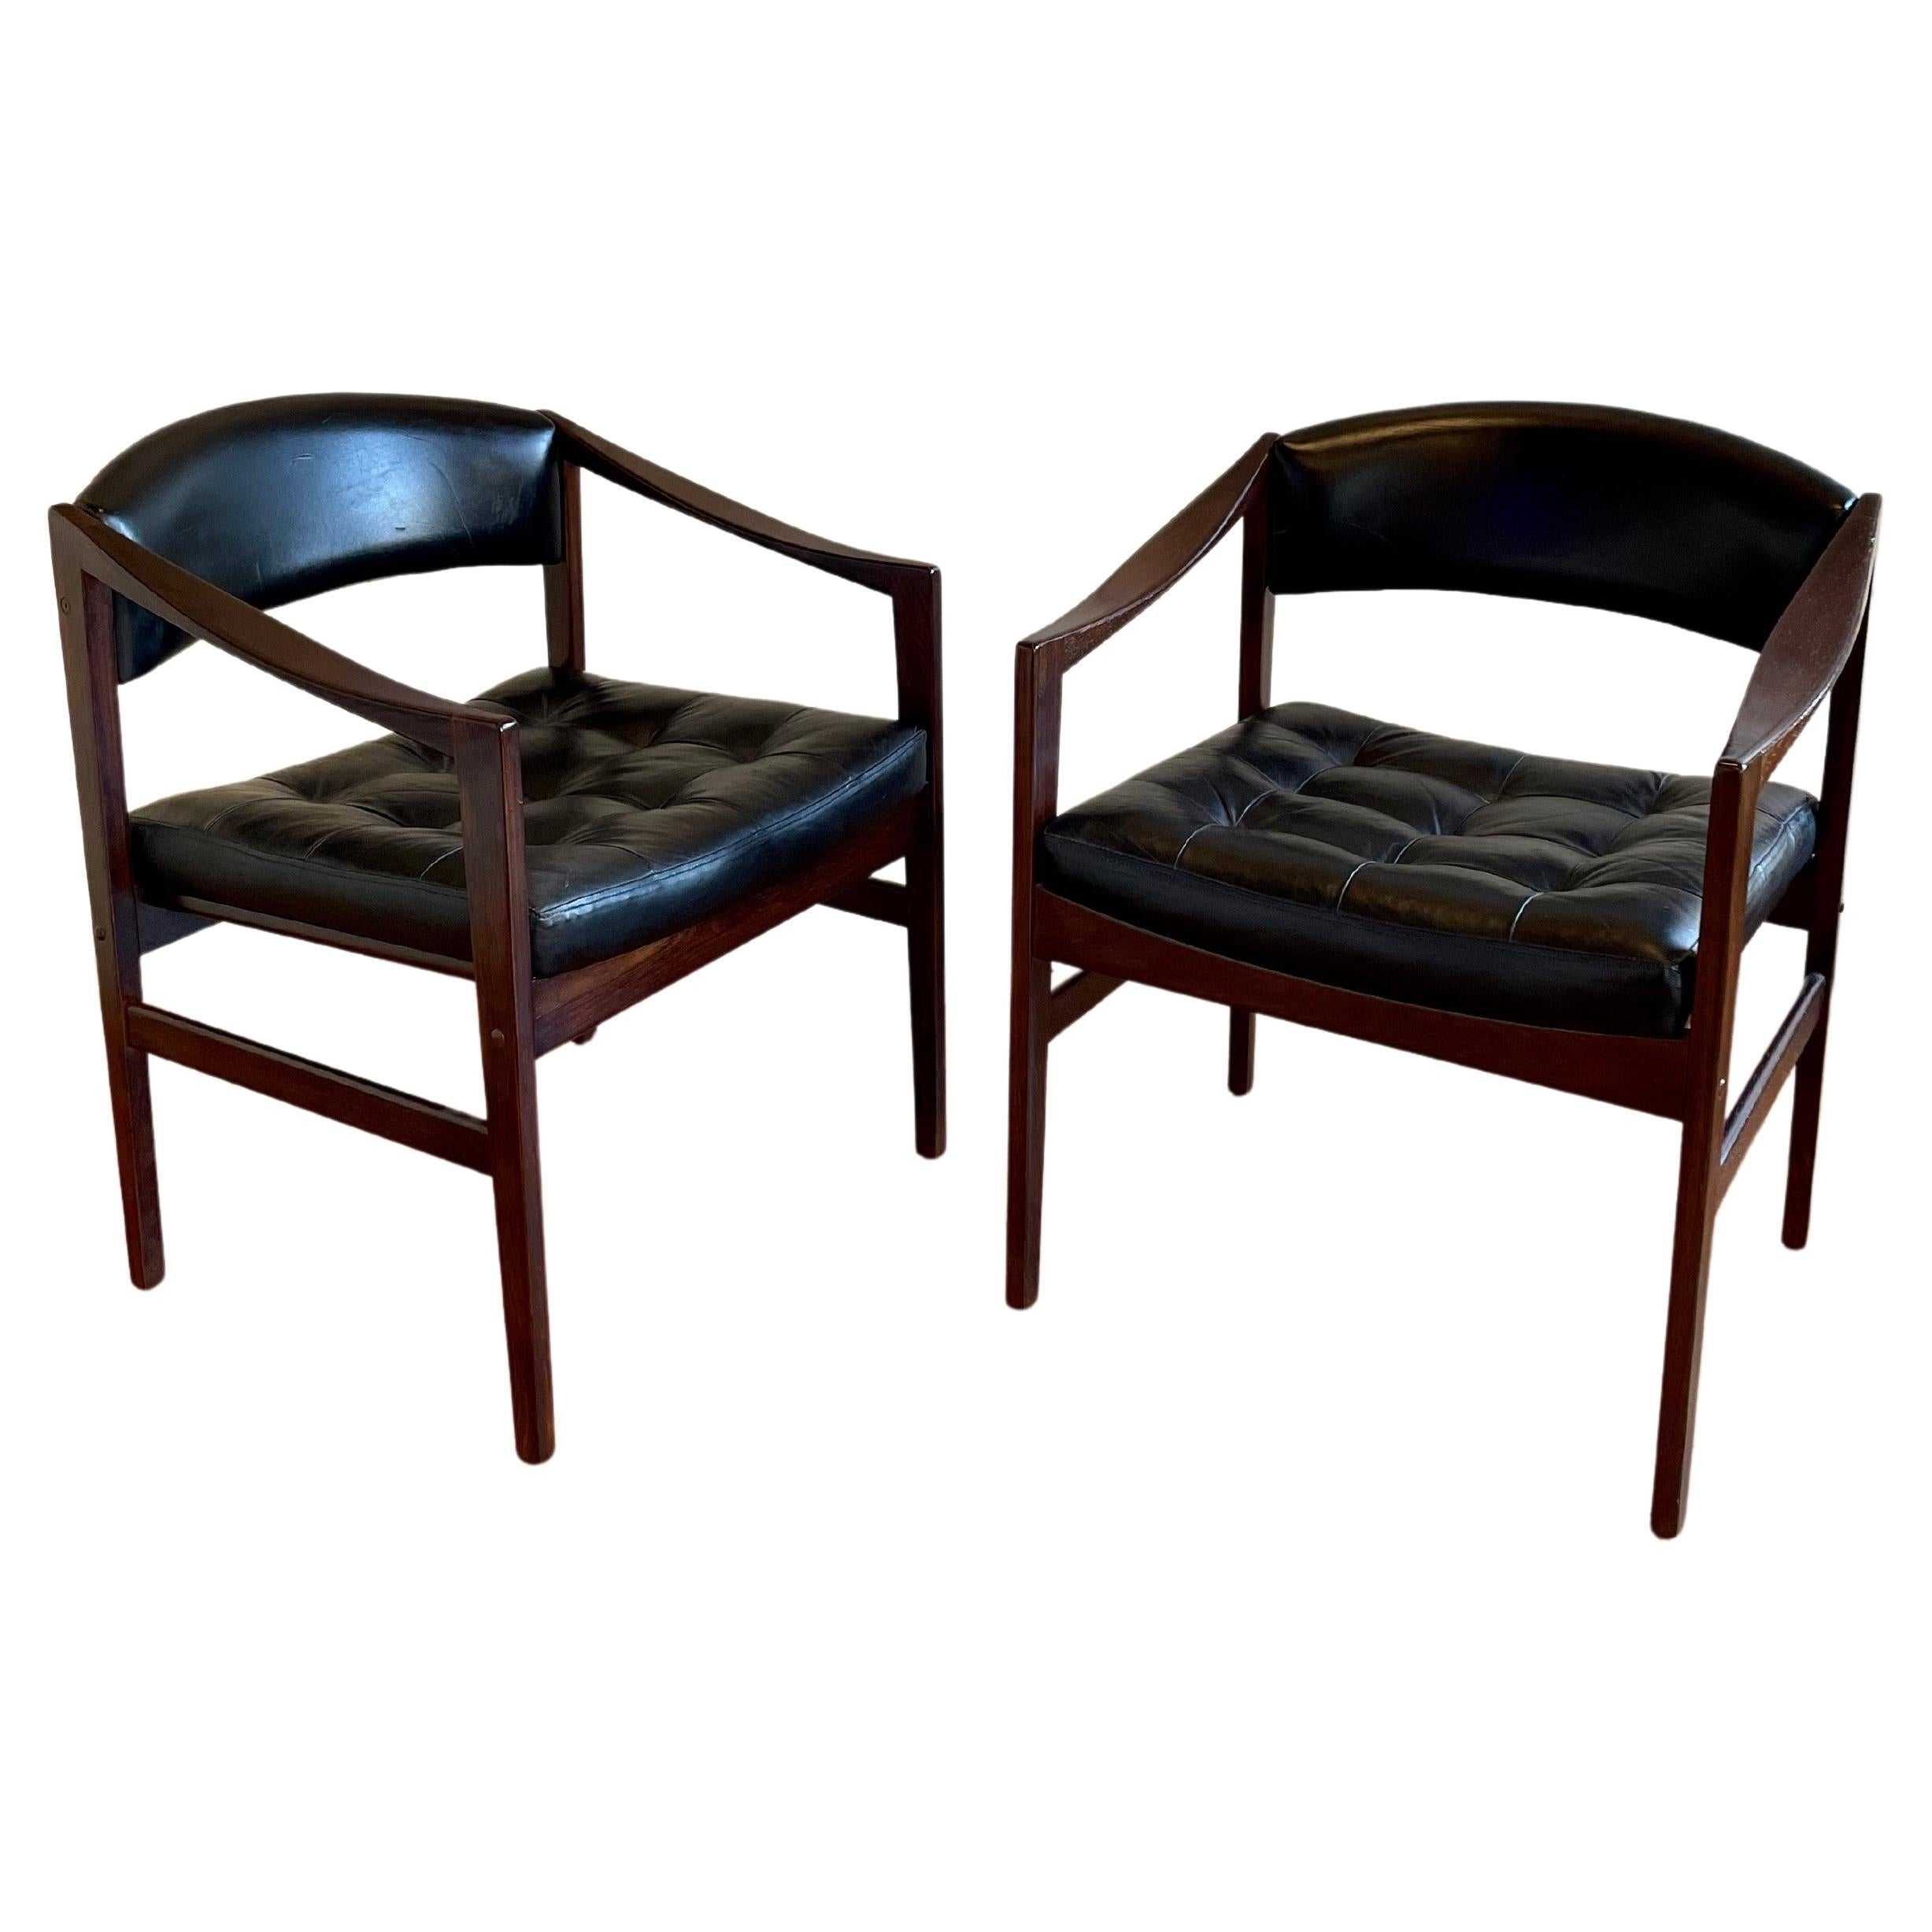  Open Frame Sculpted Armchairs Dux for Dunbar in Solid Rosewood & Leather